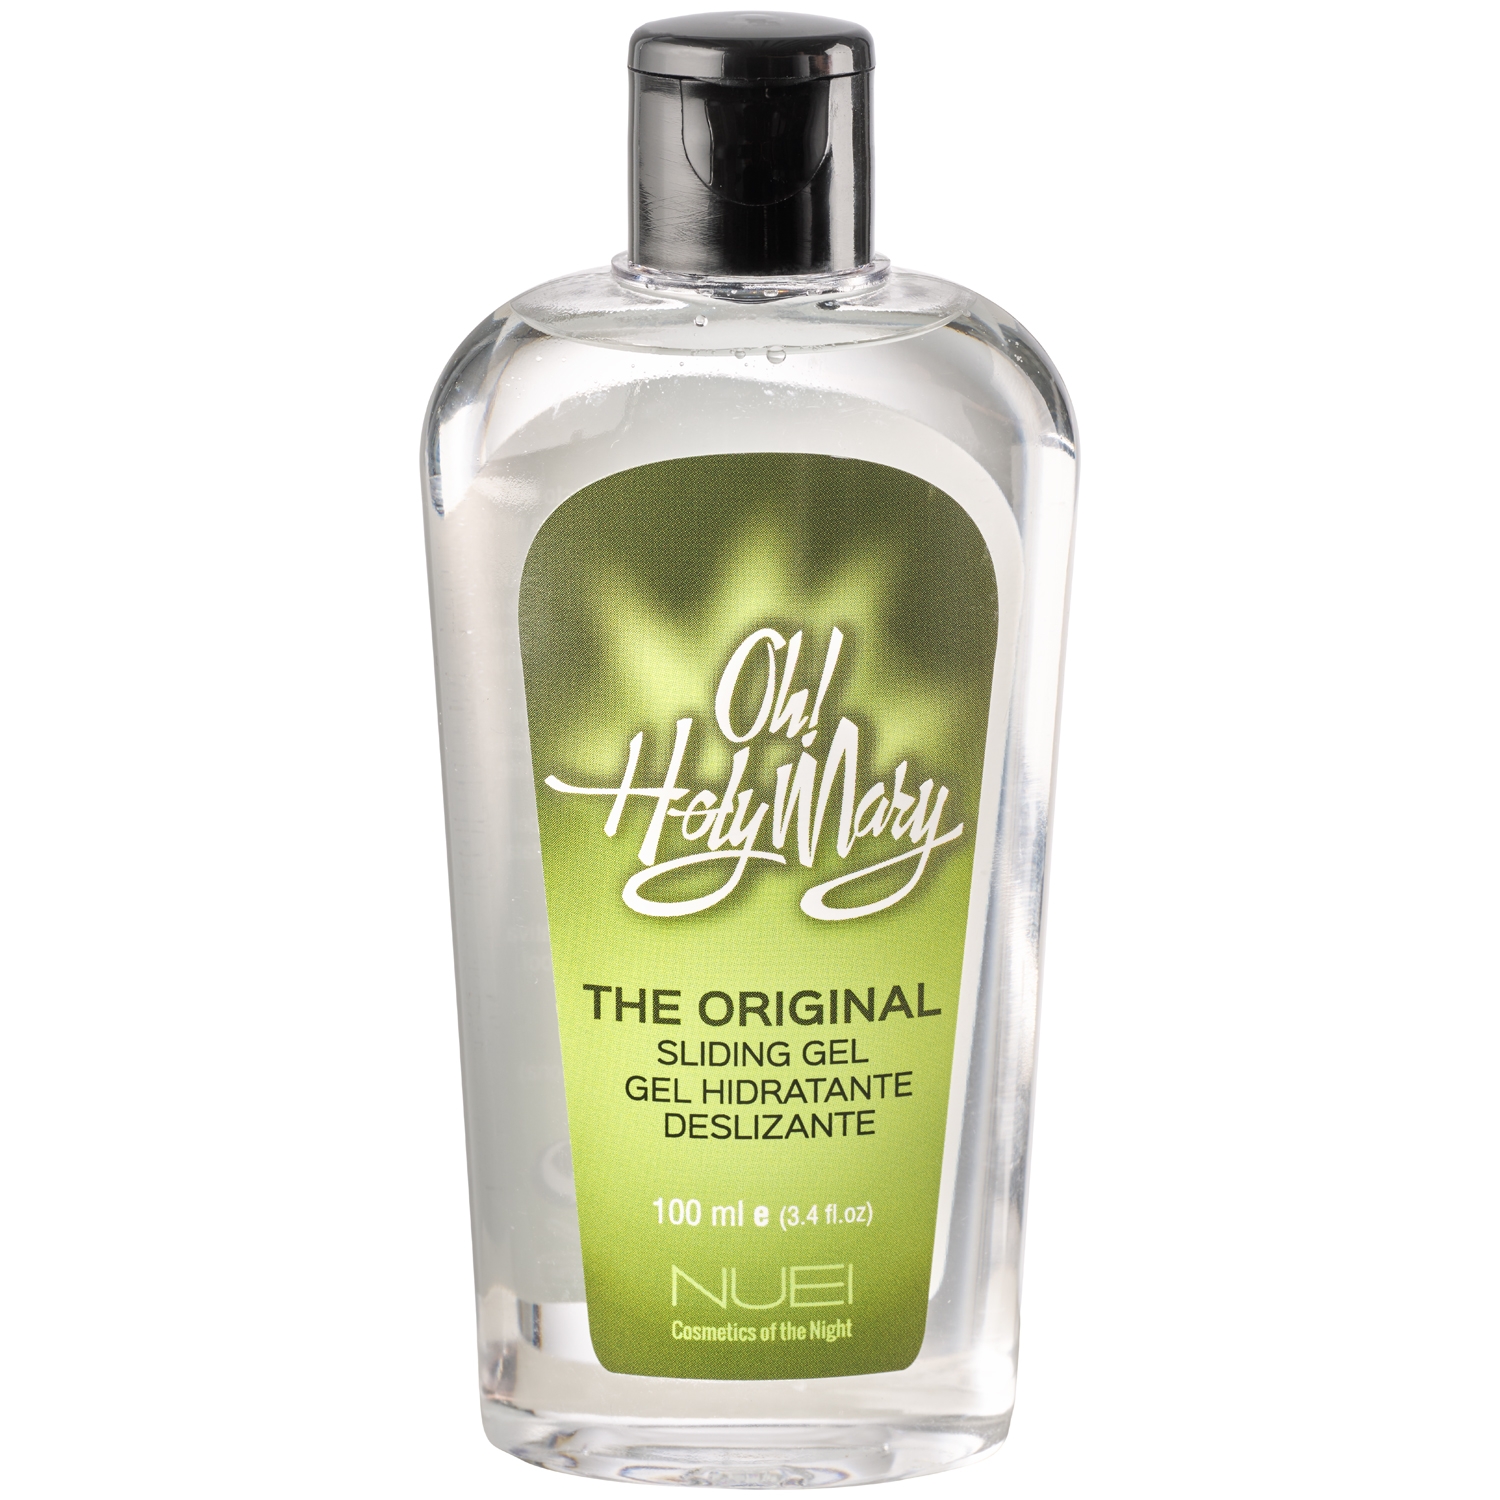 Oh! Holy Mary The Original Sliding Gel 100 ml - Clear